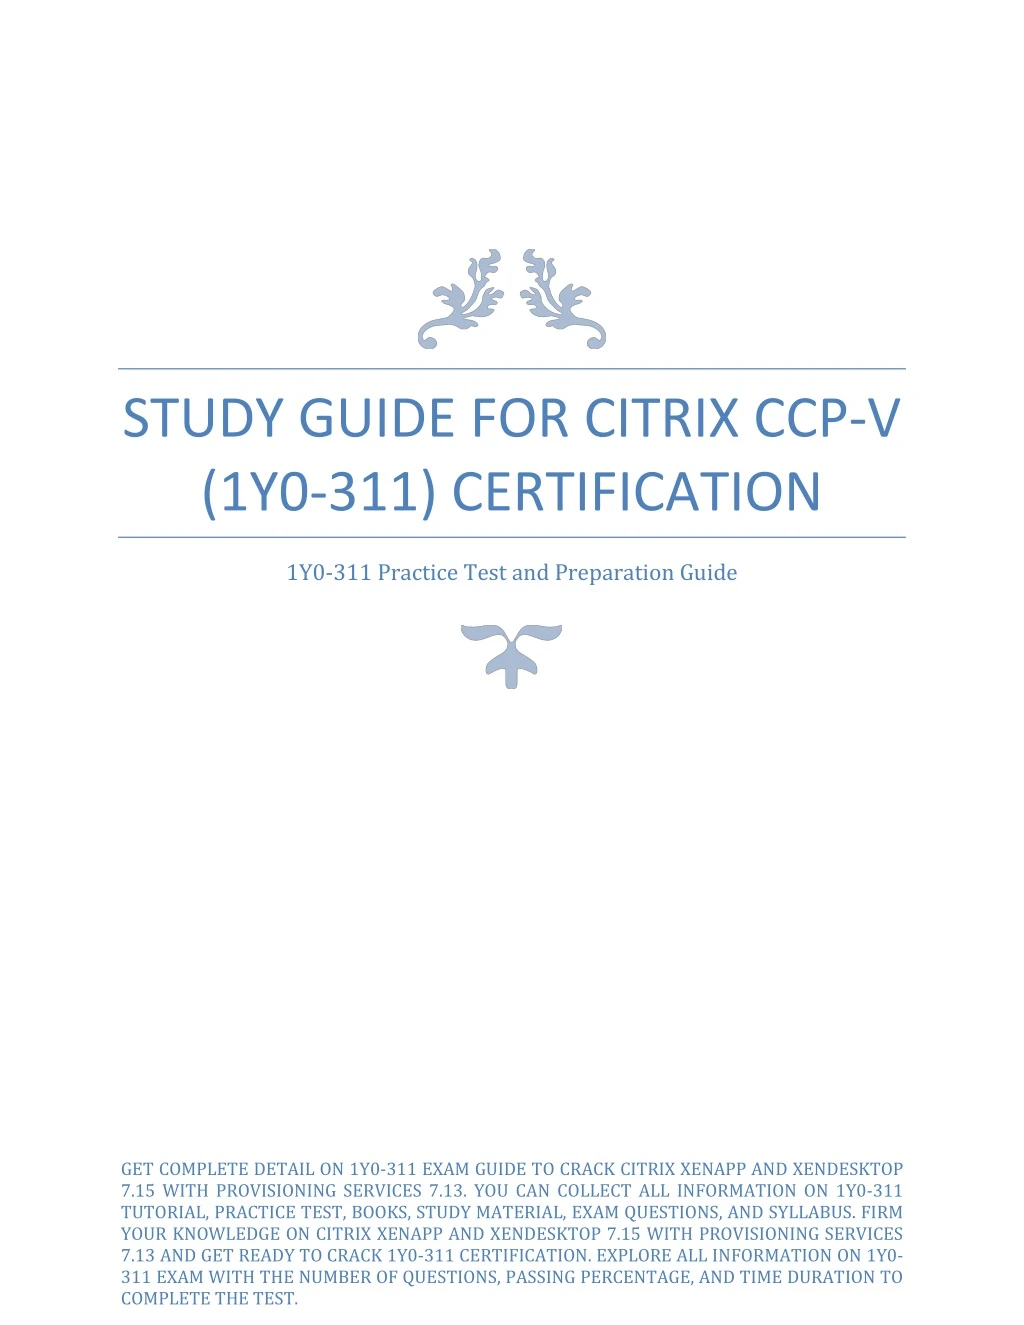 study guide for citrix ccp v 1y0 311 certification